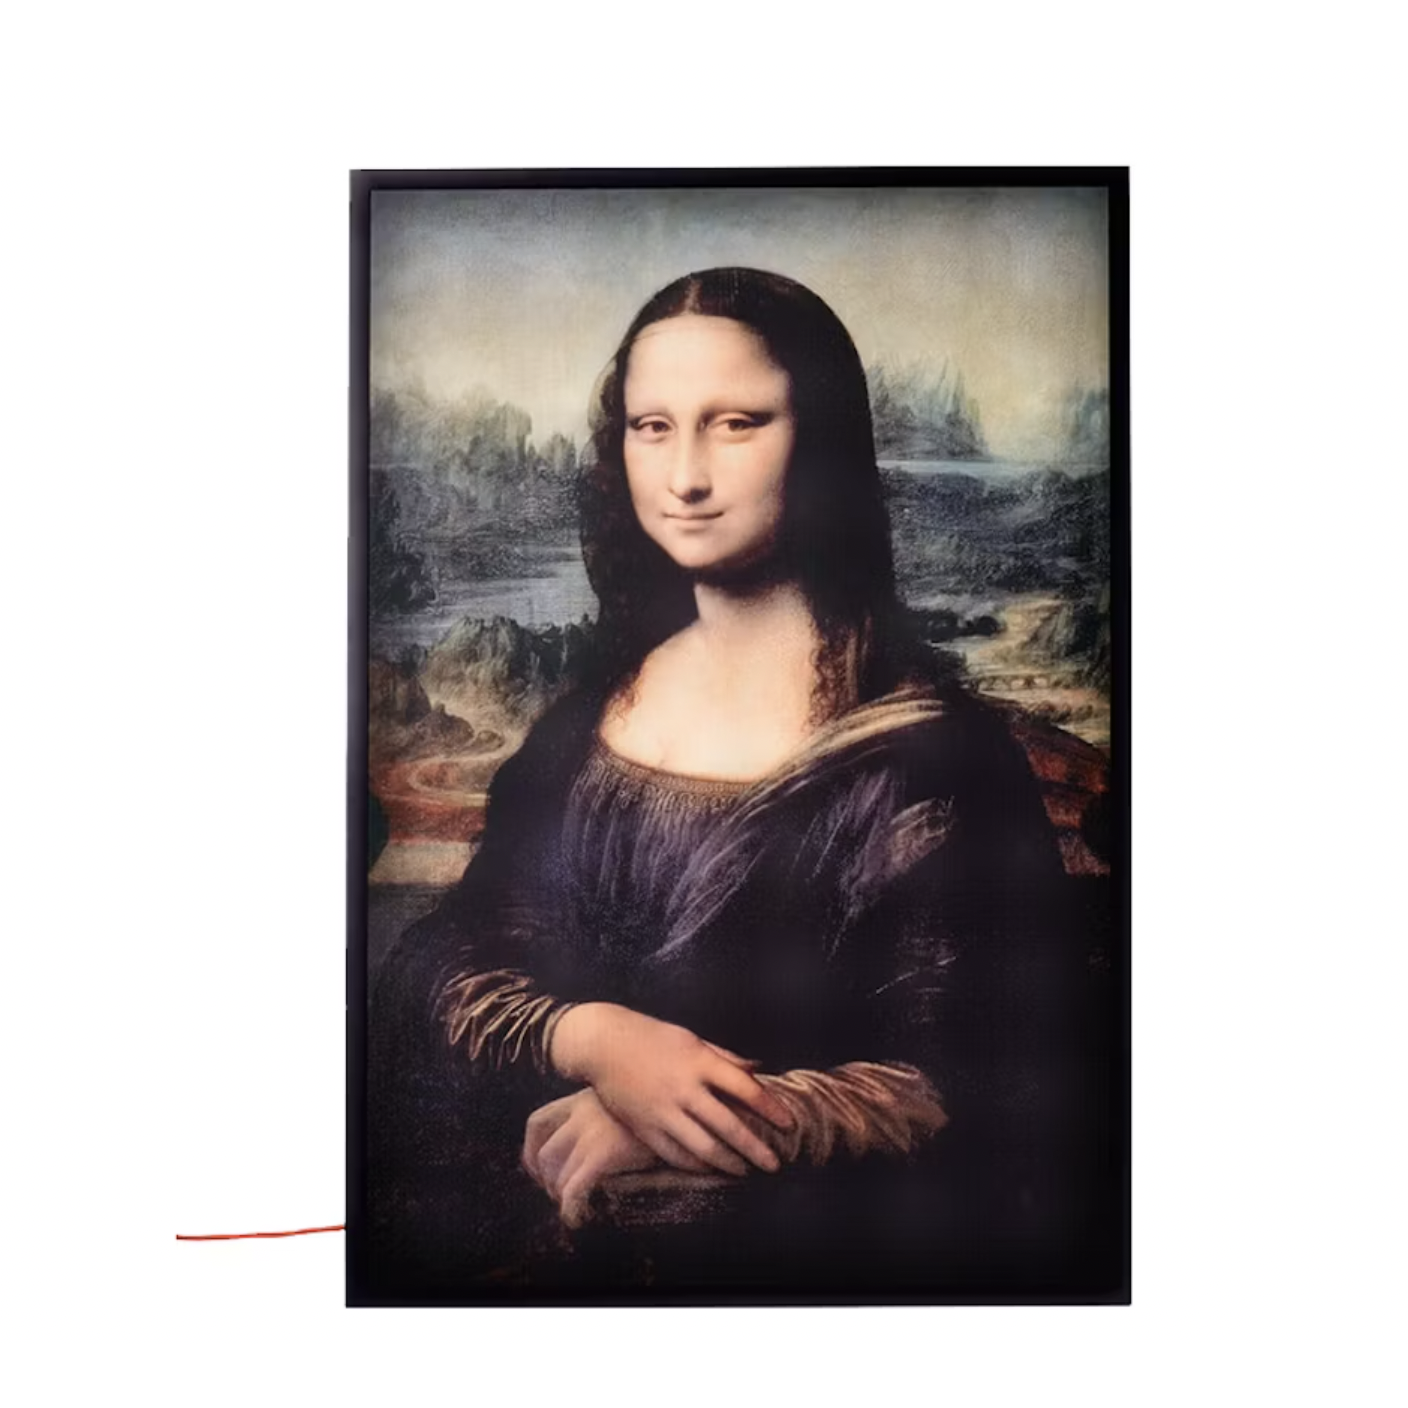 Virgil Abloh x IKEA MARKERAD "MONA LISA" Backlit Artwork Multicolor by Off White from £400.00